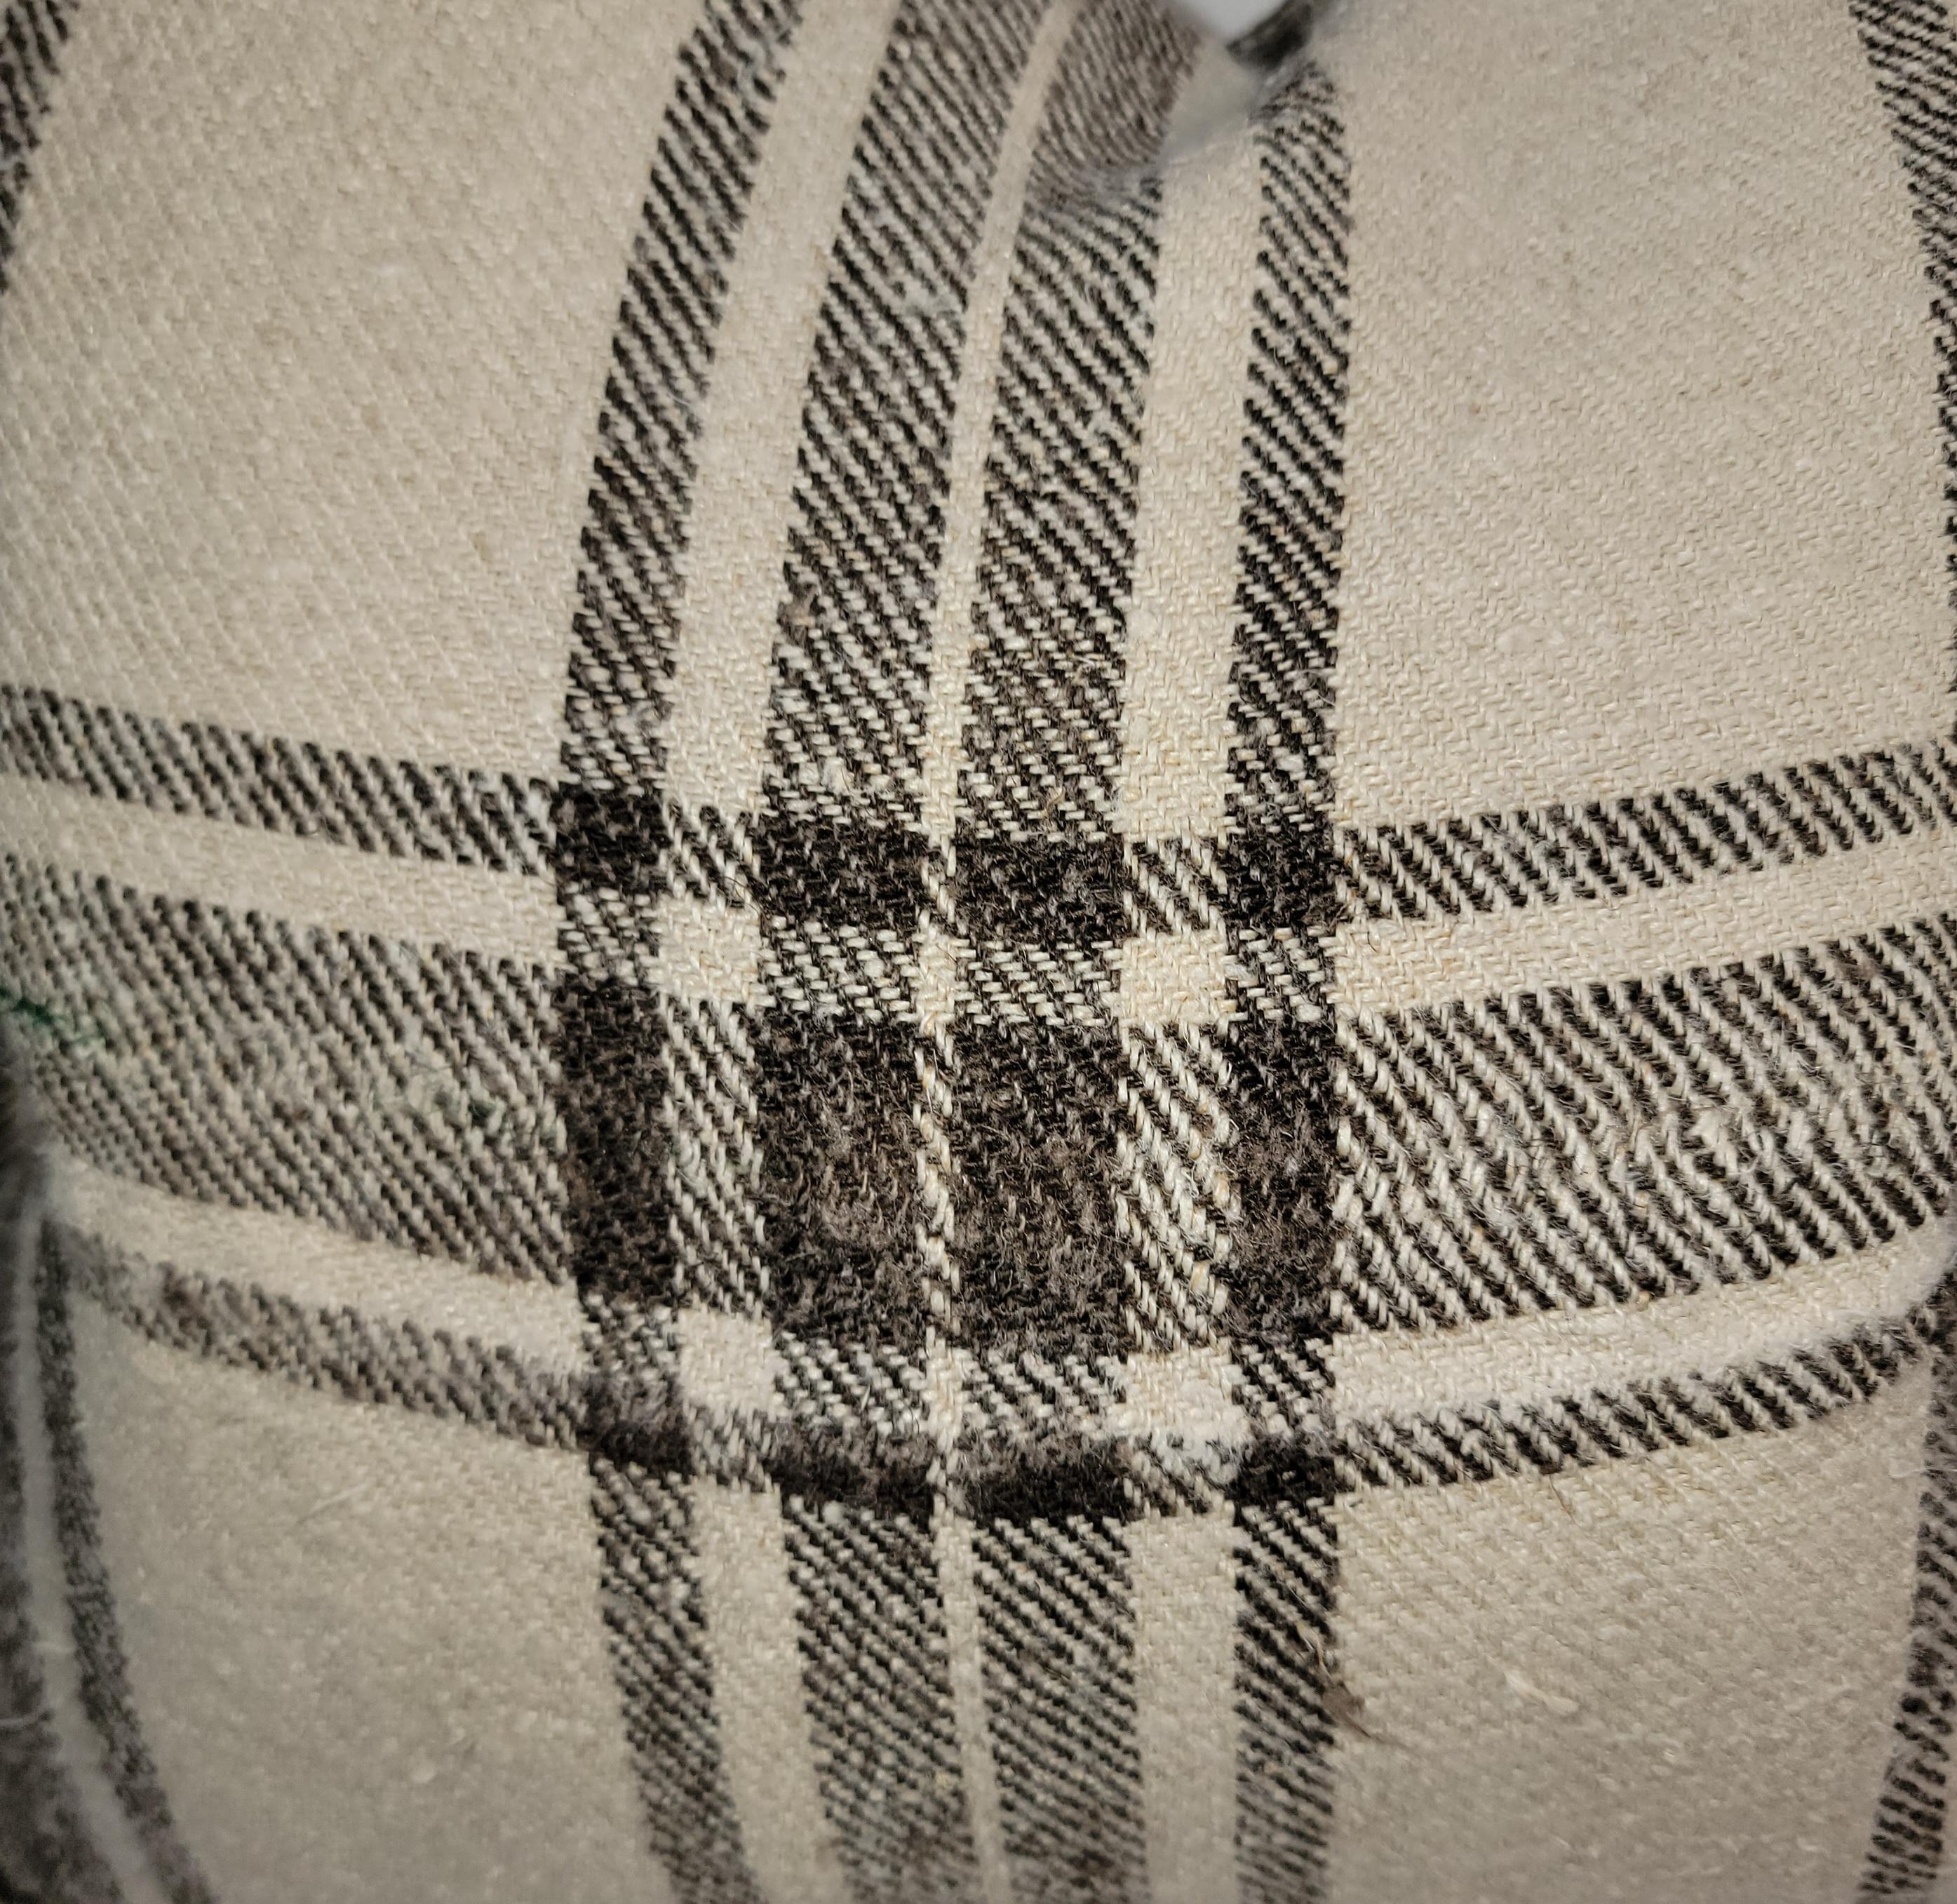 19th Century Plaid Homespun Linen Pillows, Pair In Good Condition For Sale In Los Angeles, CA